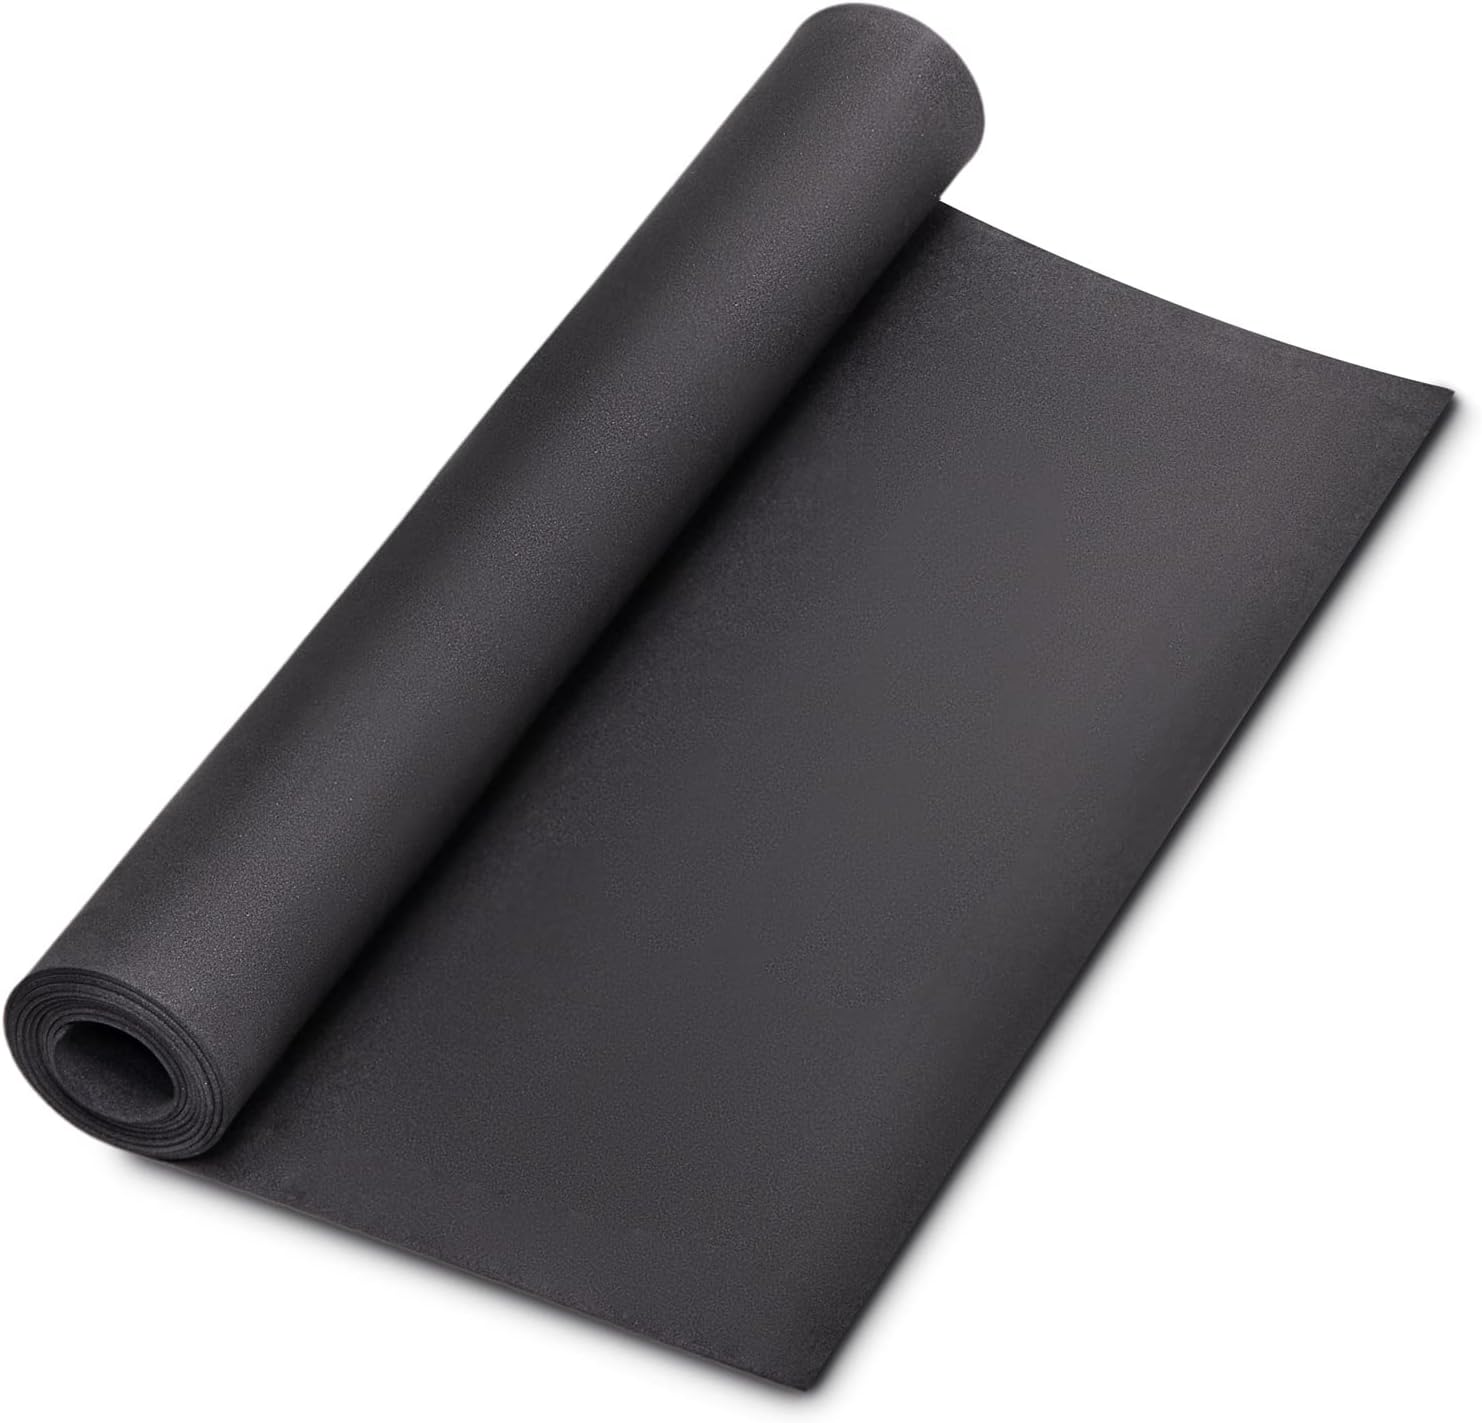 Black Eva Foam,Premium Cosplay EVA Foam Sheet（1mm to 10mm),49"x13.5",1mm Thickness,for Cosplay Crafts DIY Projects by PAIDU